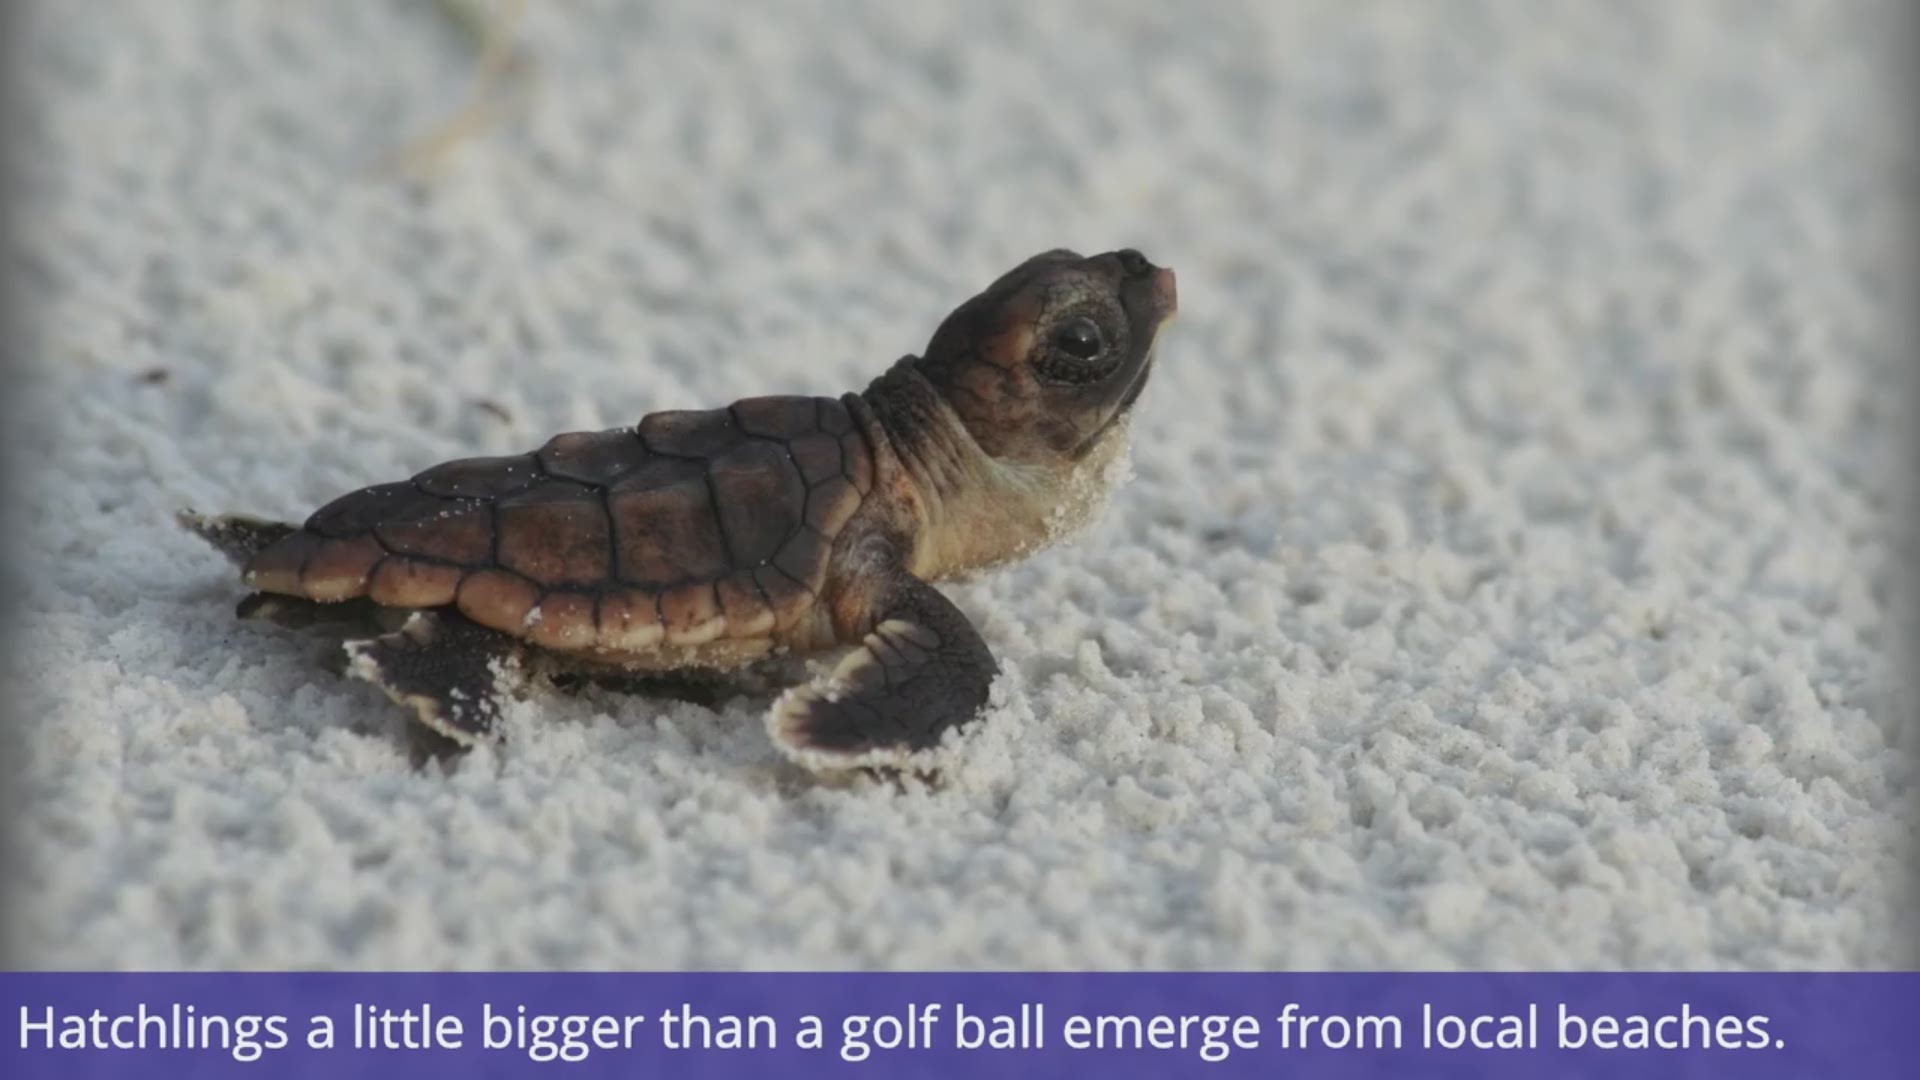 Loggerhead sea turtles are the most common sea turtle found in Southwest Florida. They get their common name from their relatively large heads. Video courtesy Delmarva Now